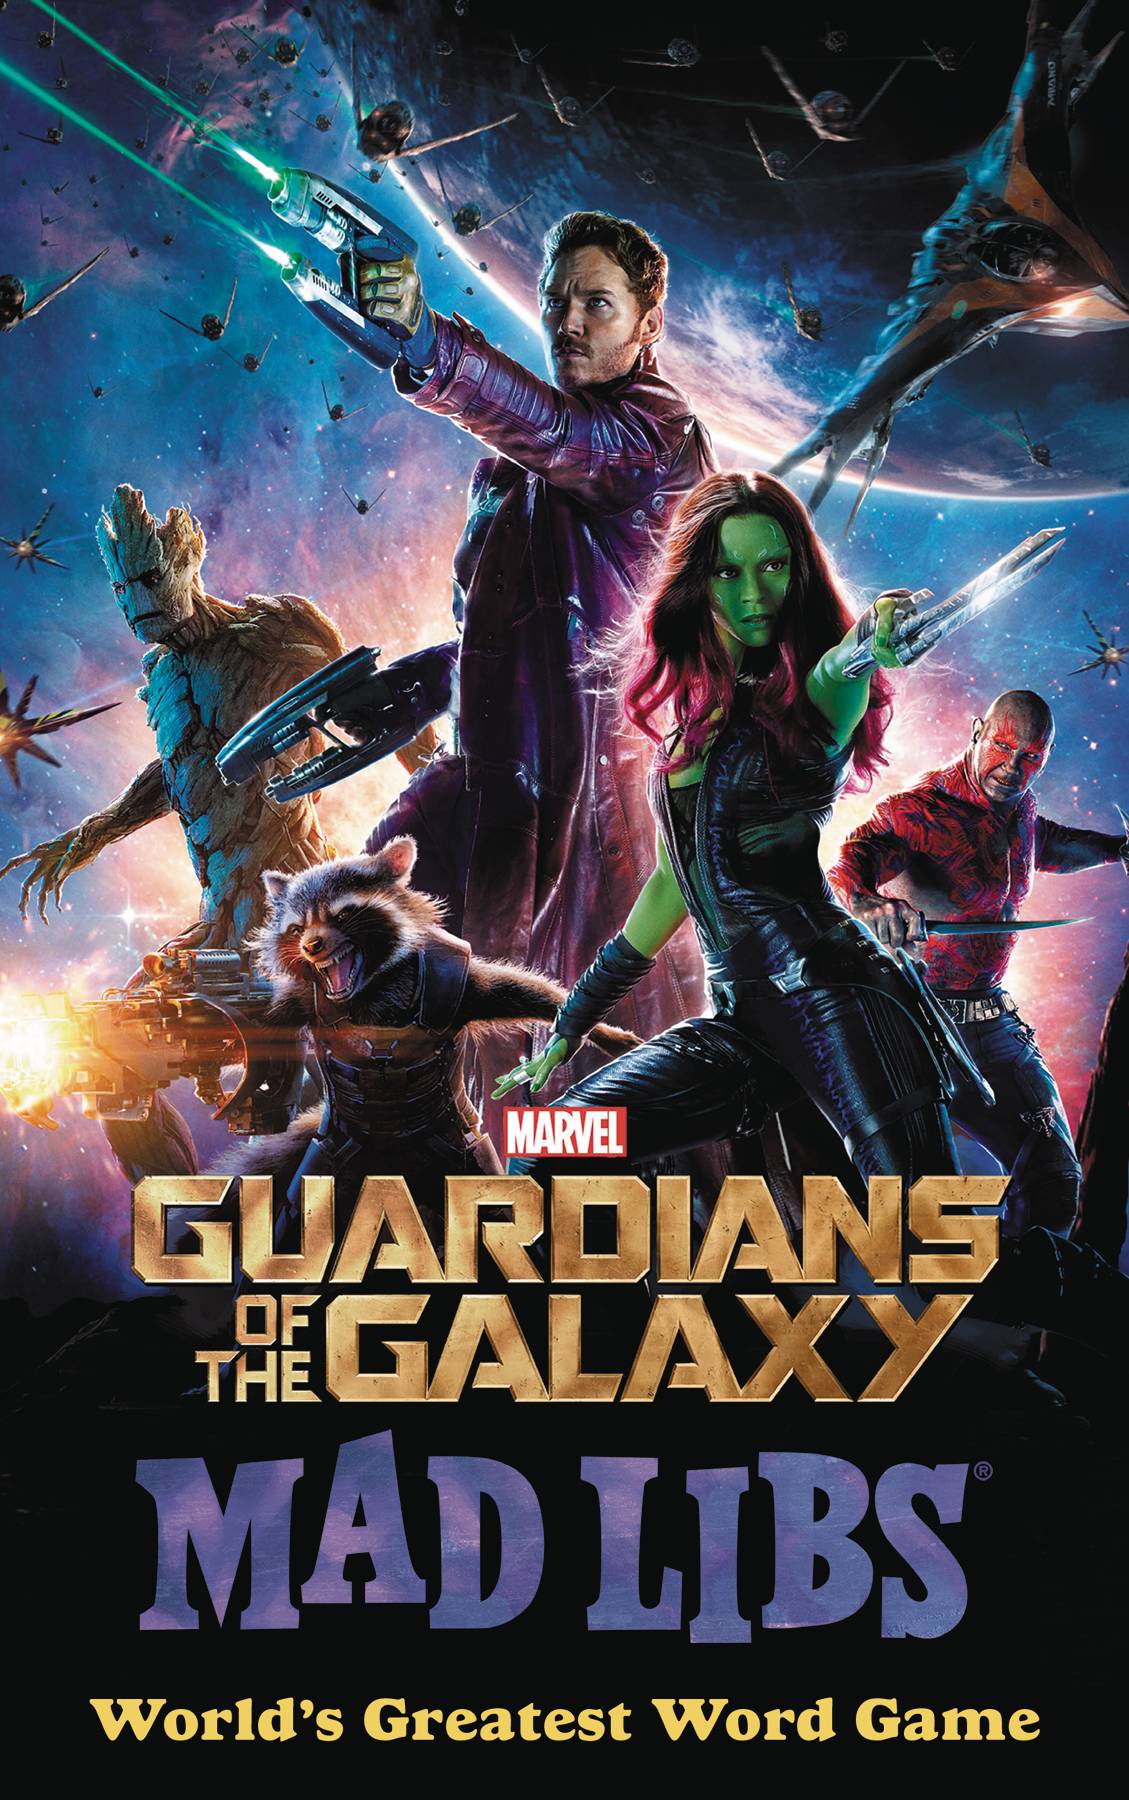 Marvel Guardians of Galaxy Mad Libs Softcover